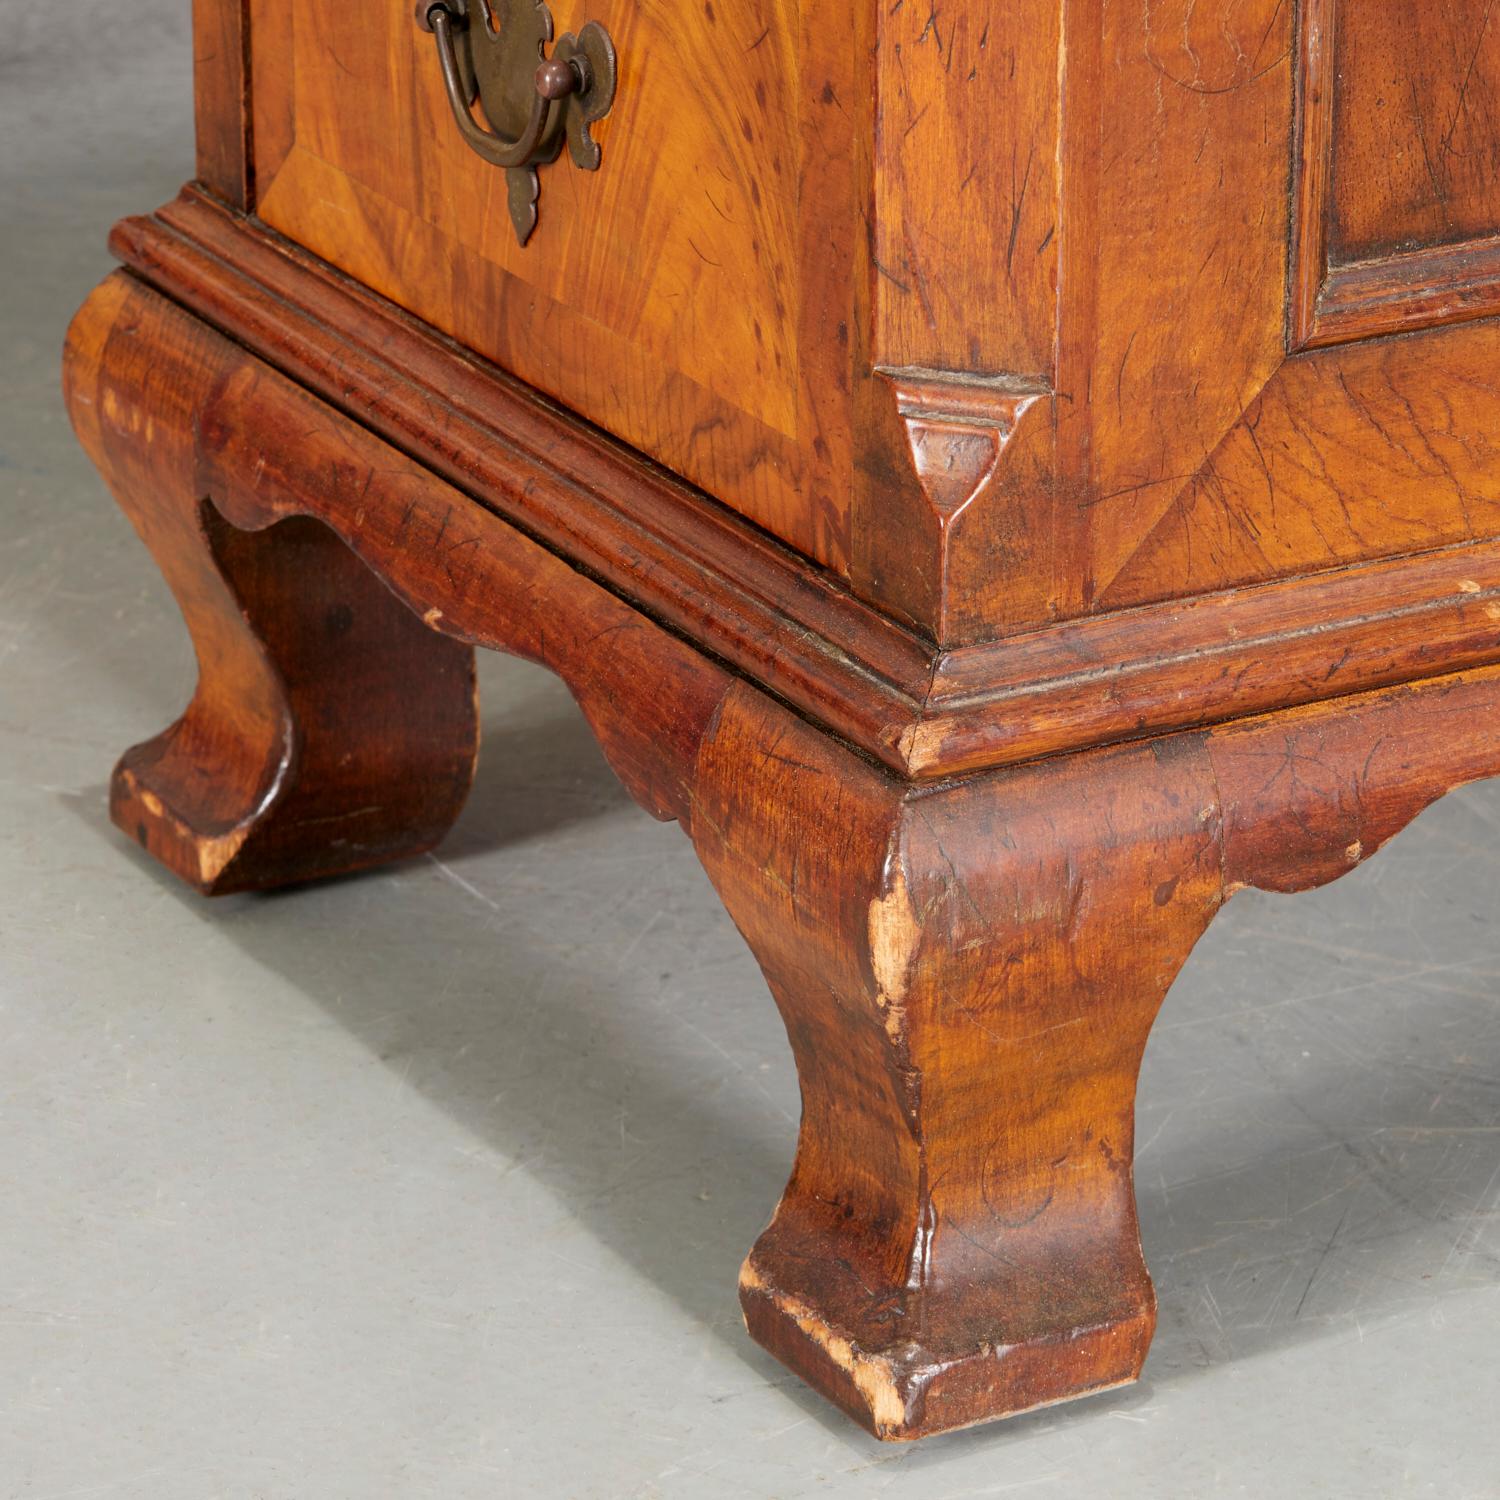 20th Century George III Style Figured Mahogany Desk with Embossed Leather Top For Sale 1